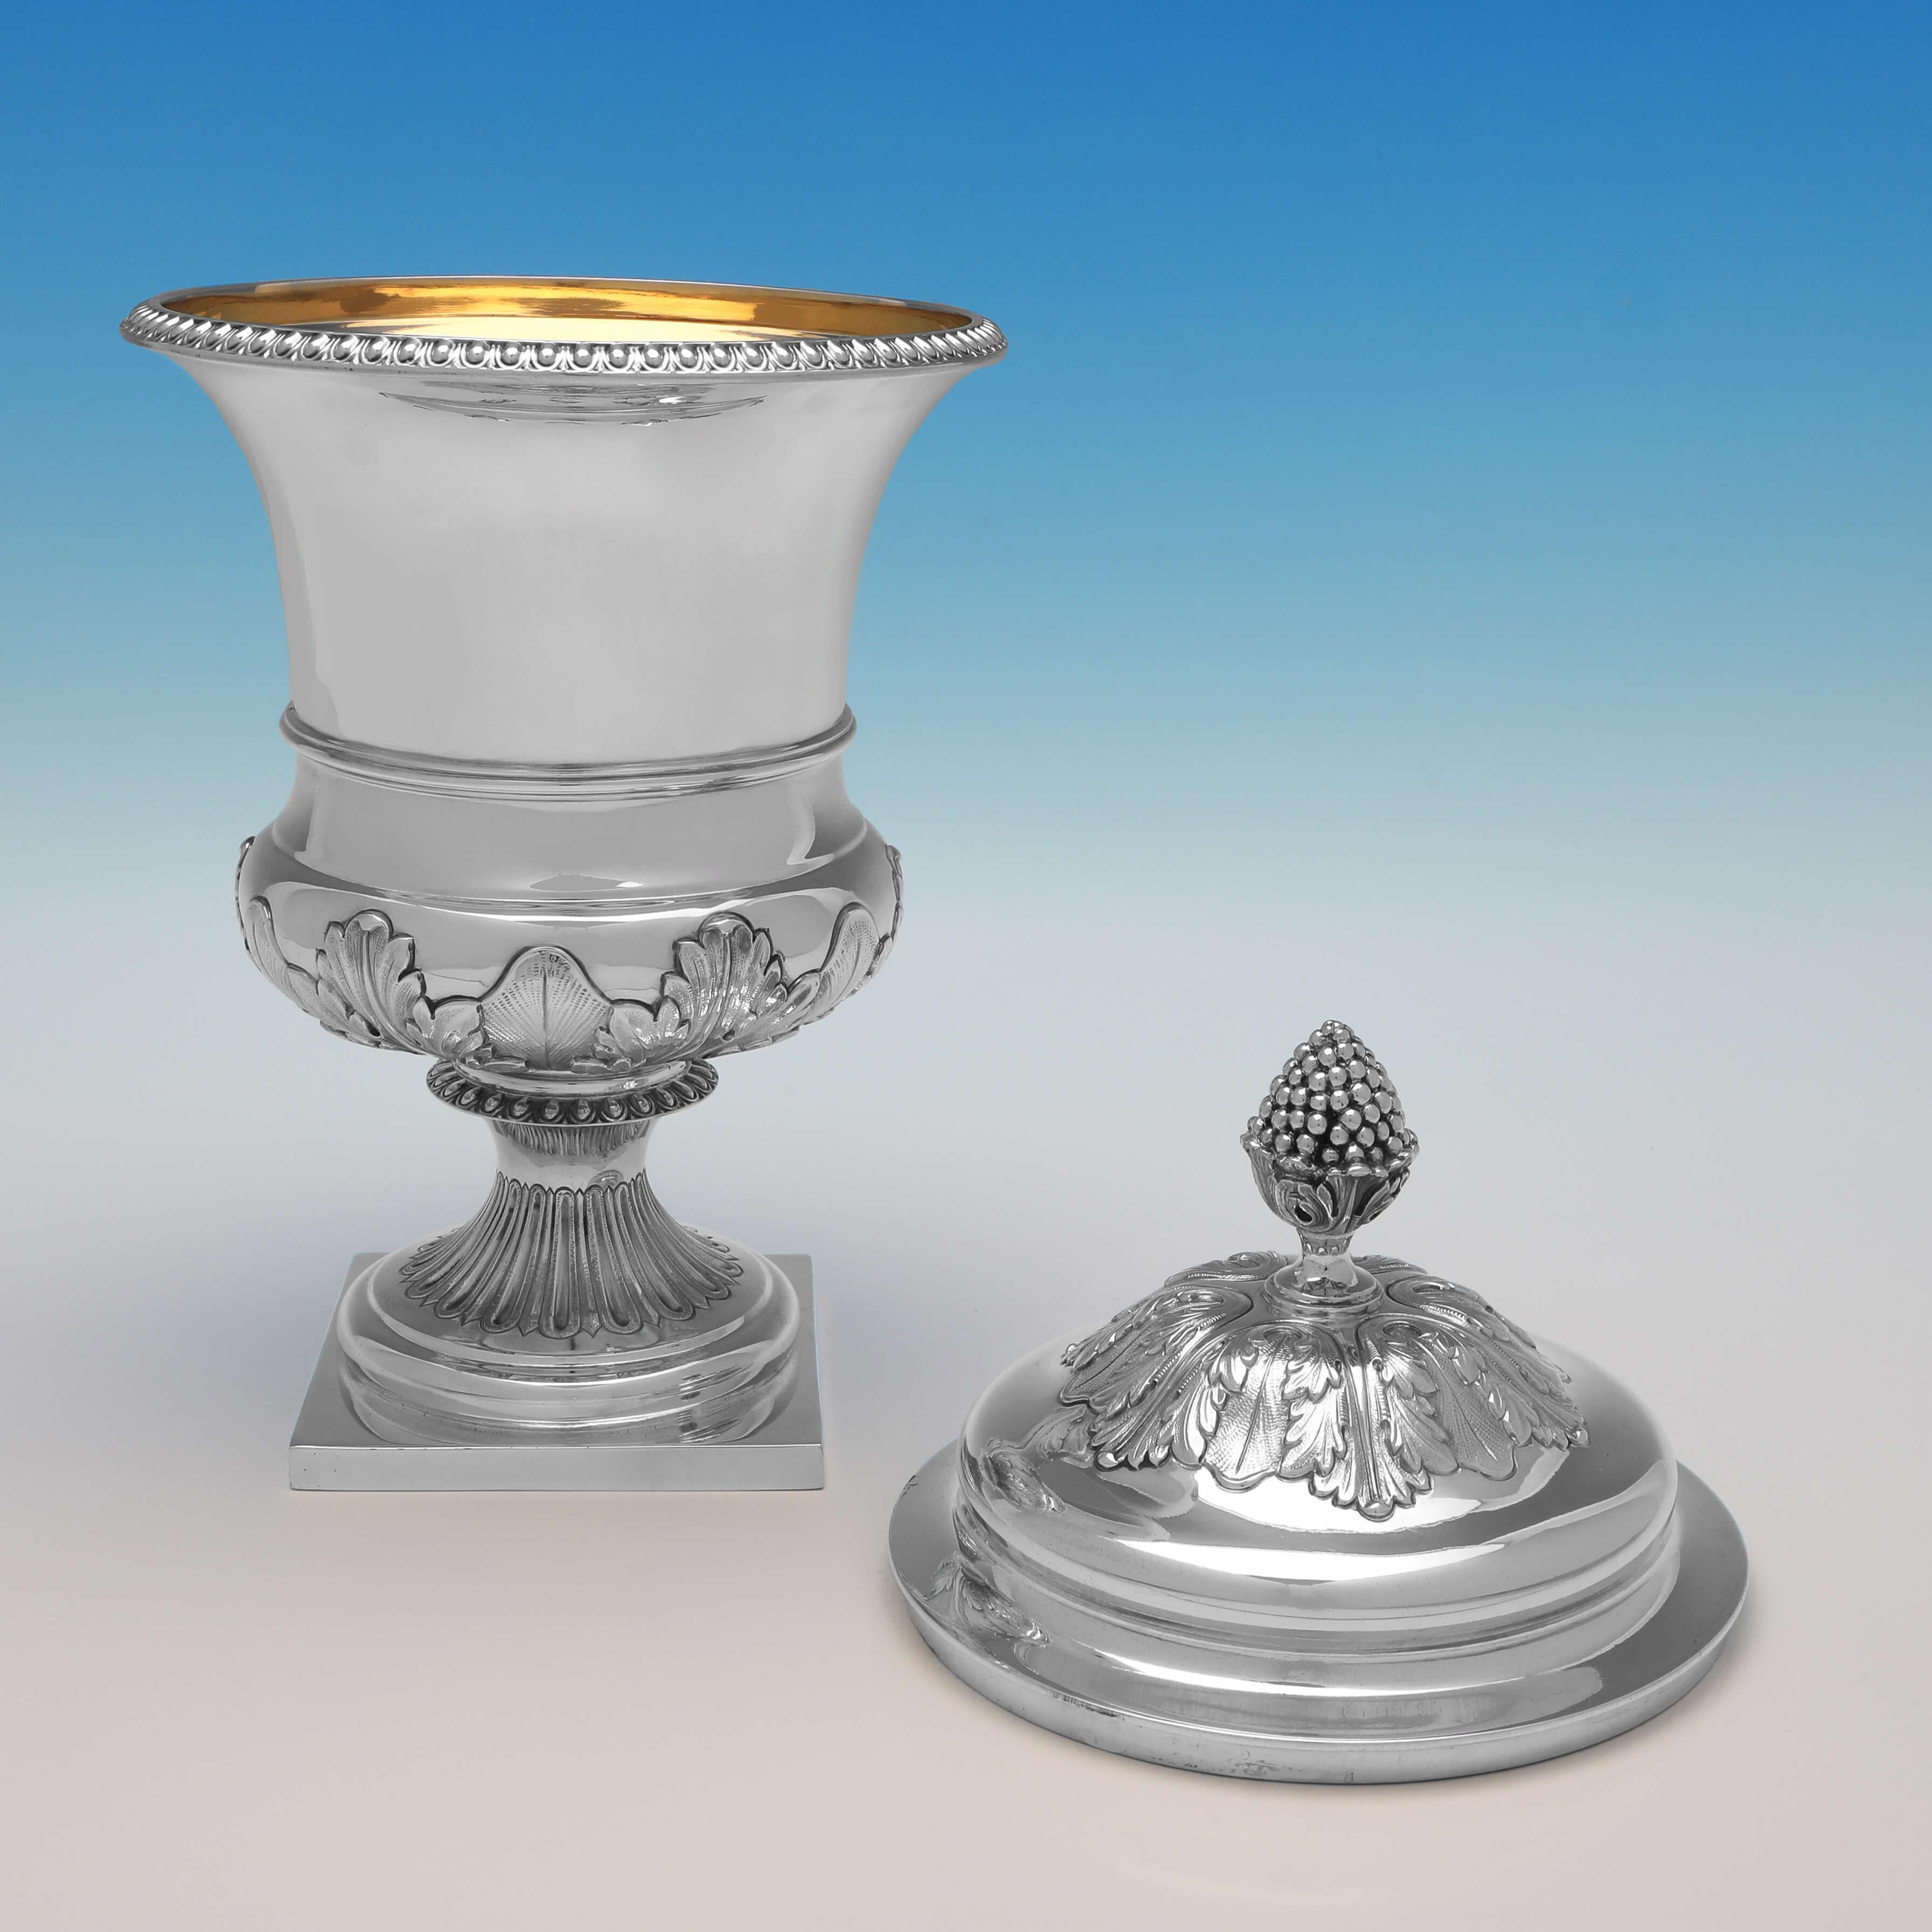 Hallmarked in London in 1928 by Reid & Sons, this Sterling Silver Cup & Cover, stands on a square base, and features a gadroon border and chased acanthus decoration to the body and lid. The cup & cover measures 13